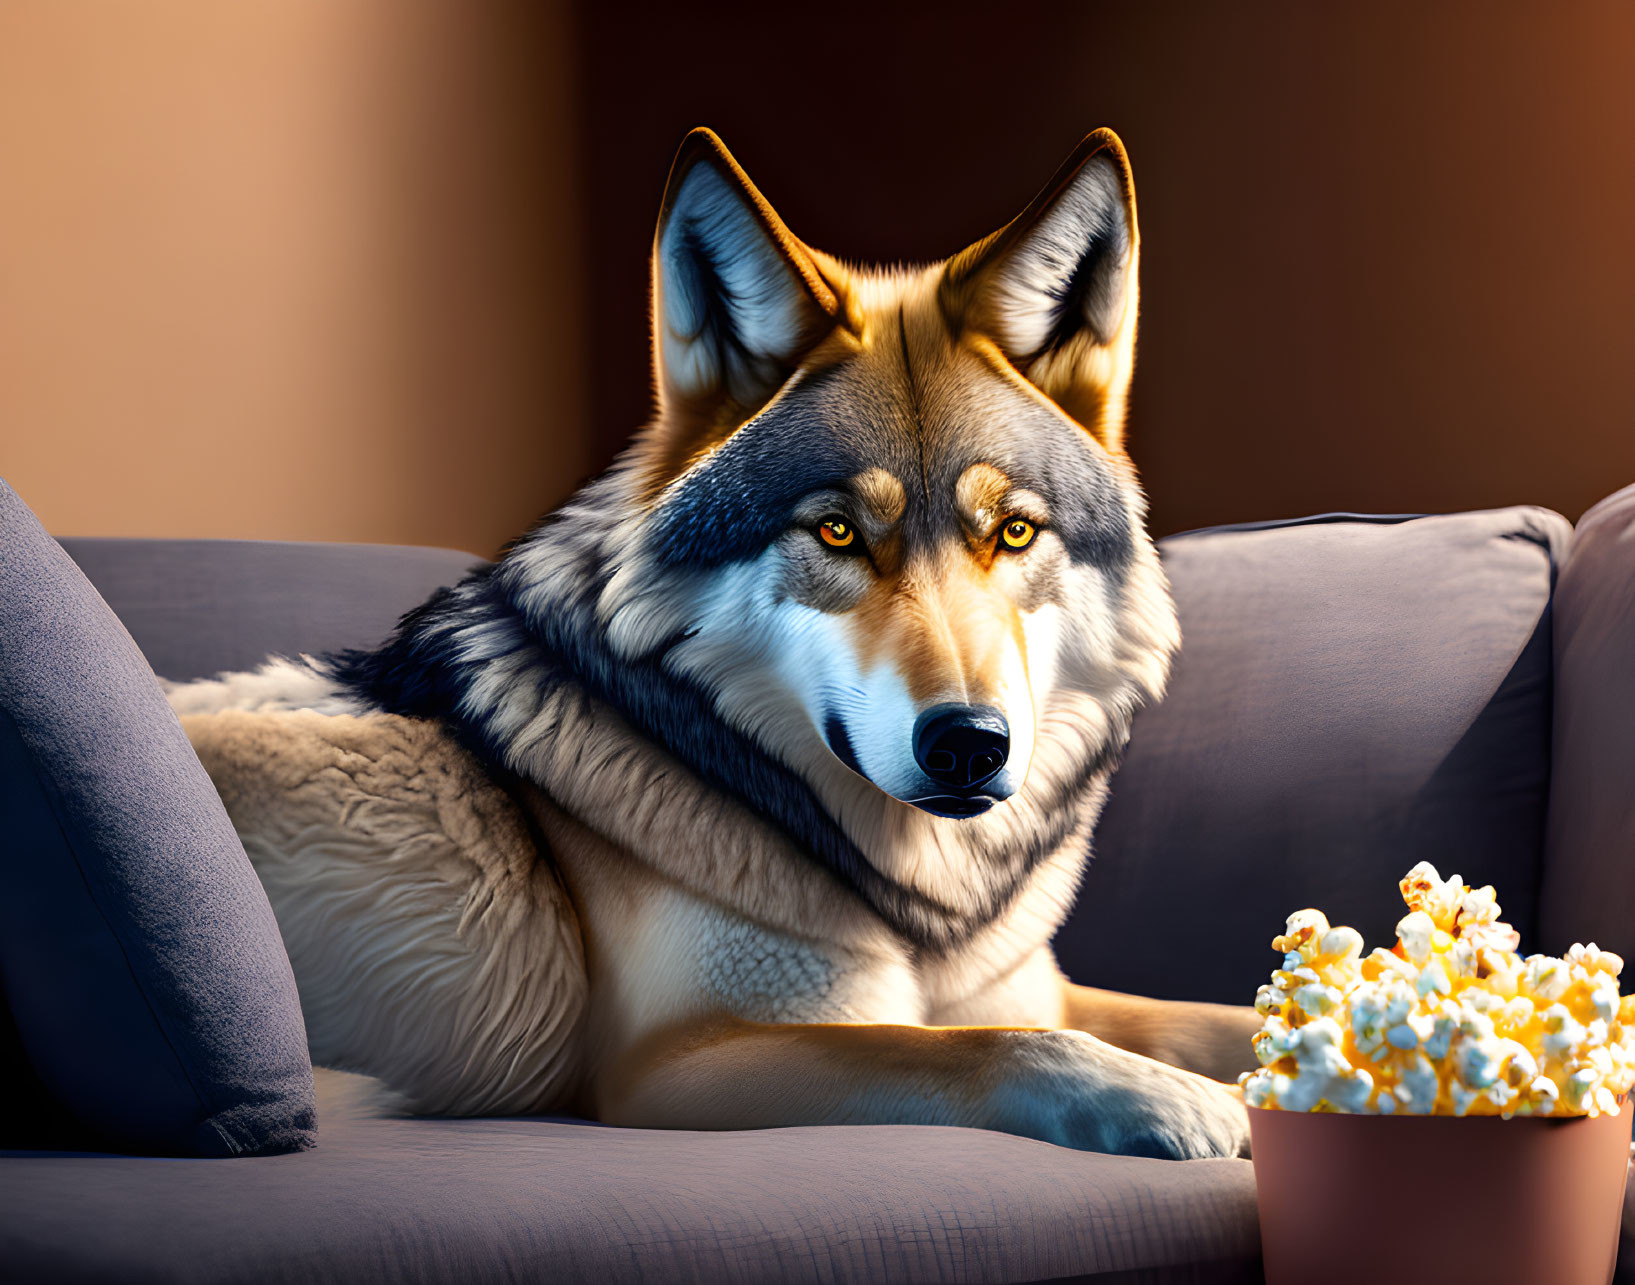 Realistic anthropomorphic wolf lounging on couch with popcorn bowl